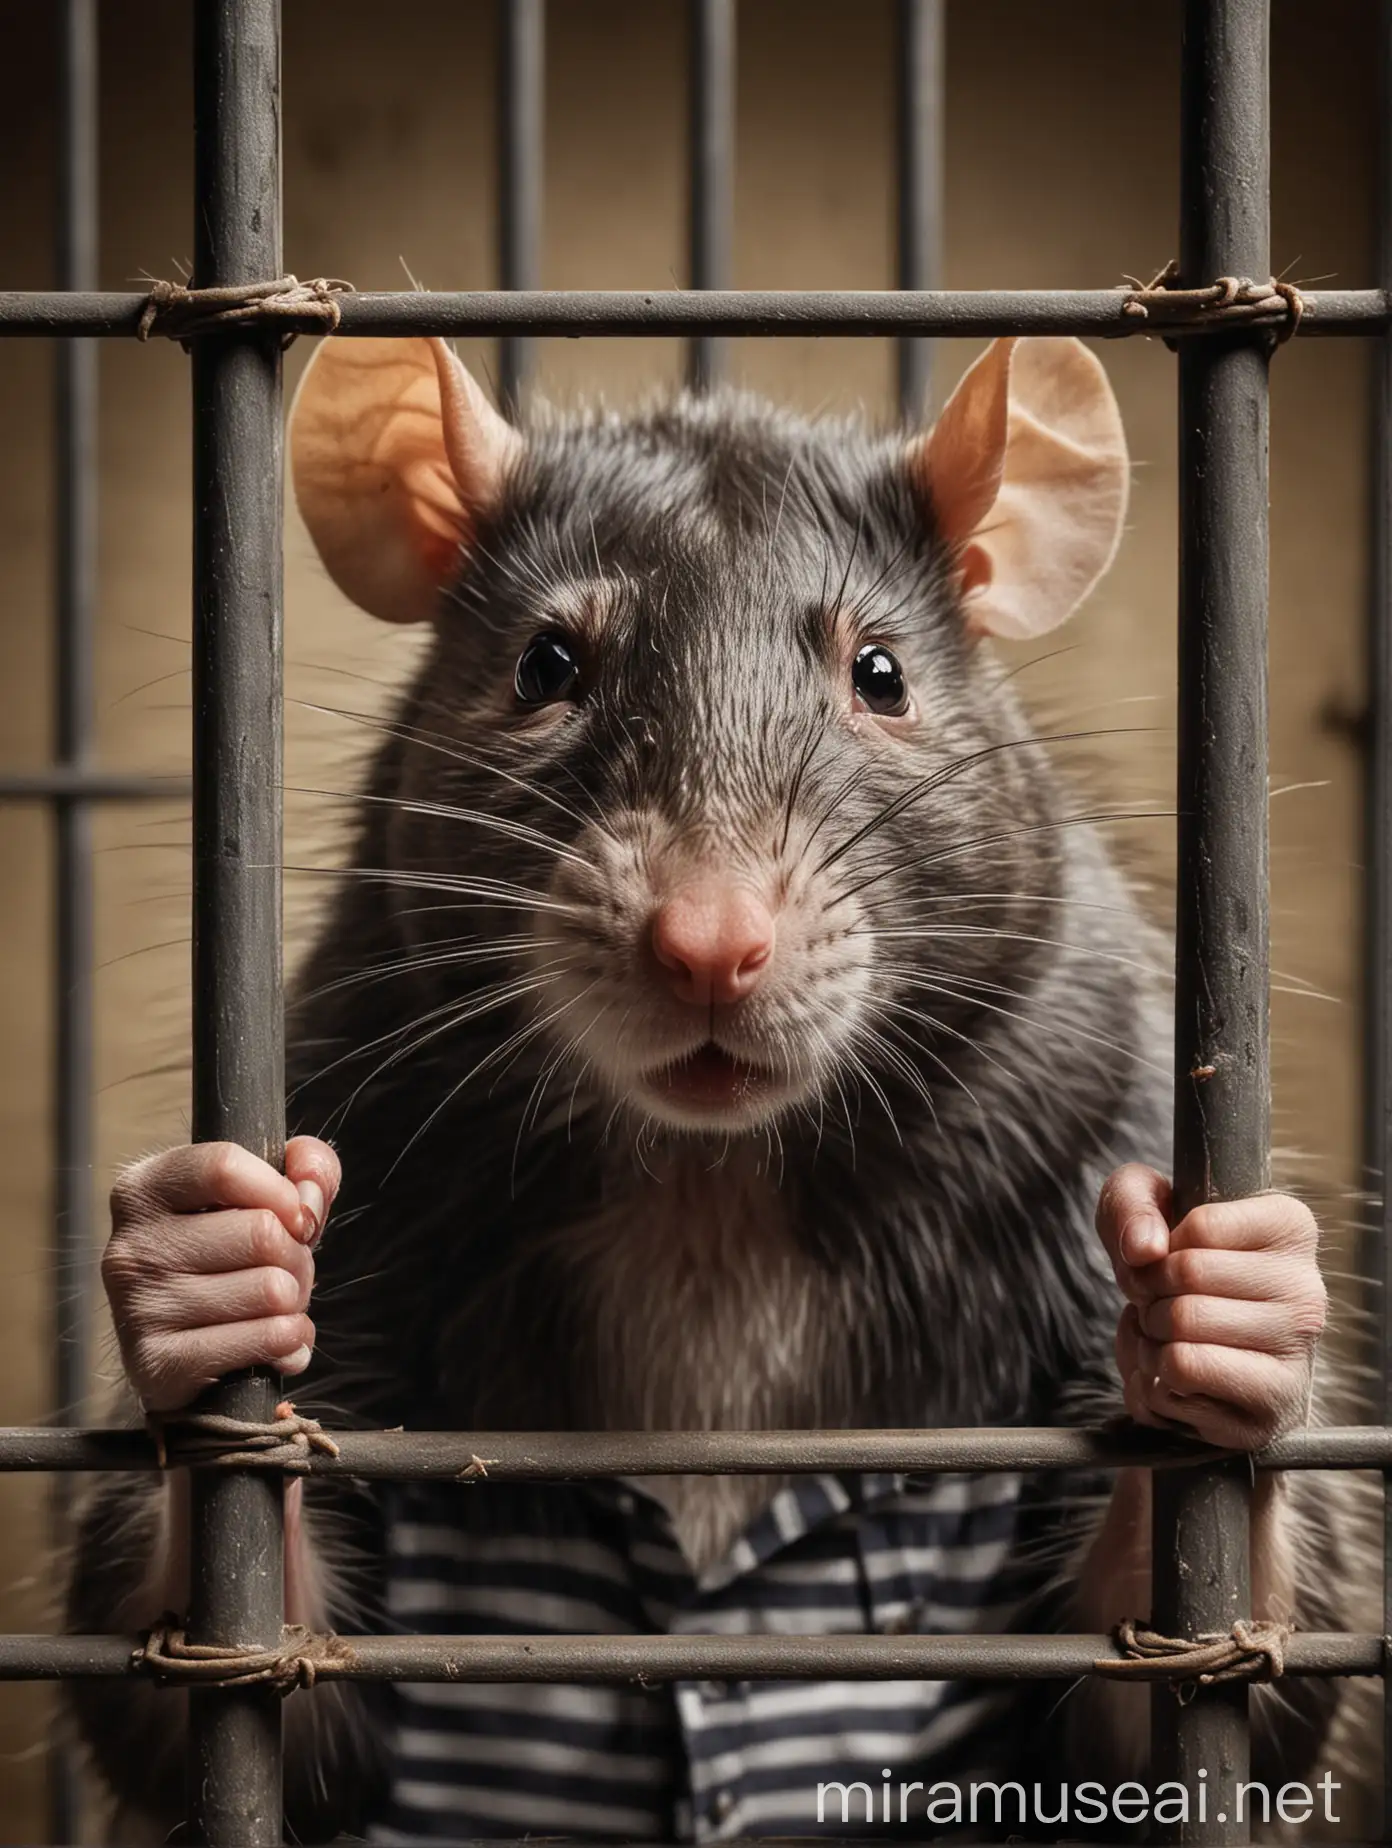 Angry Gangster Rat Behind Bars Incarcerated Rodent in Jail Cell